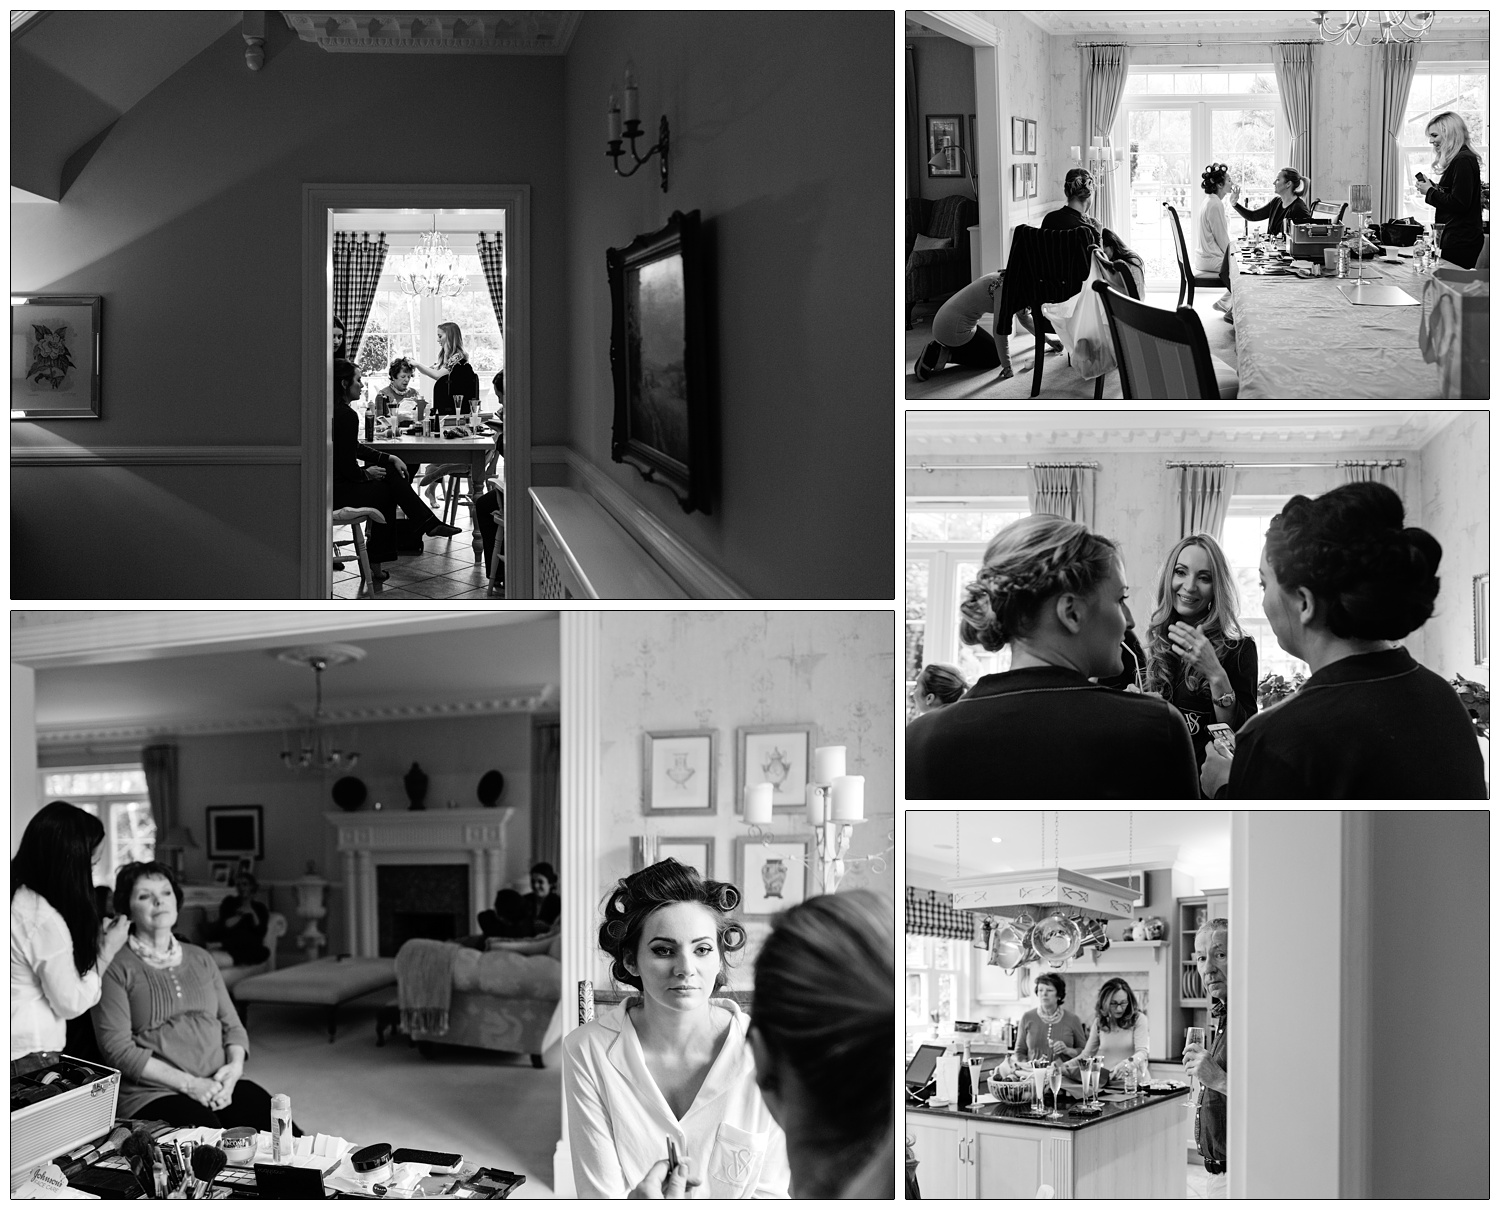 Reportage style wedding photography at home in Essex before a wedding in Purleigh. The bride has rollers in her hair, her dad is in the kitchen peeking through a door frame.